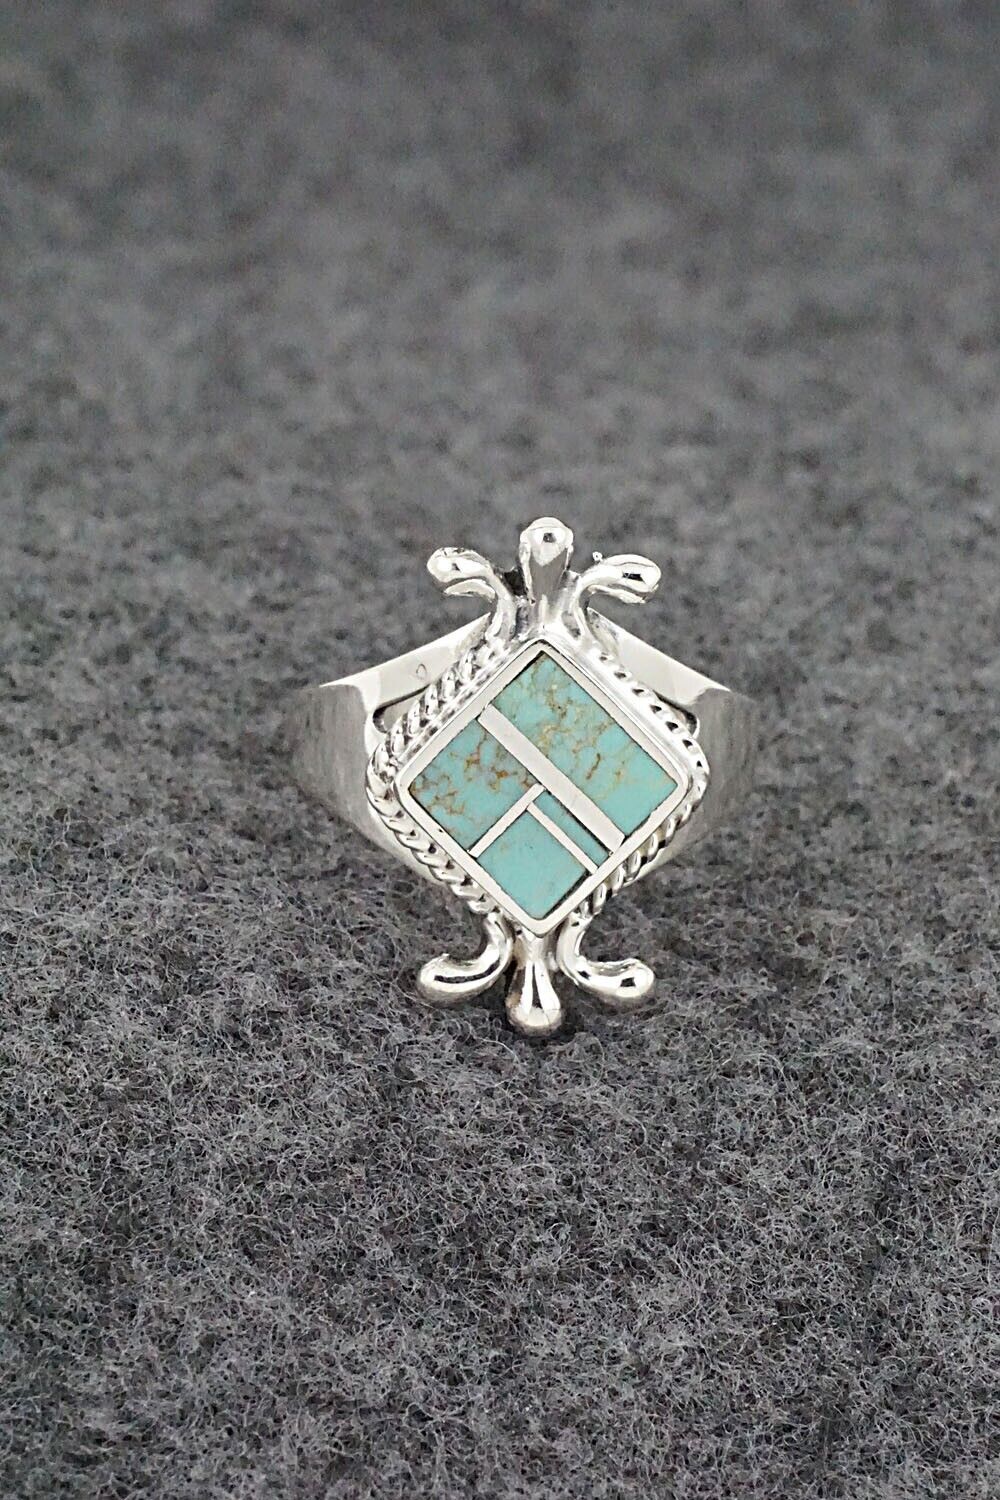 Turquoise & Sterling Silver Inlay Ring - James Manygoats - Size 7.25